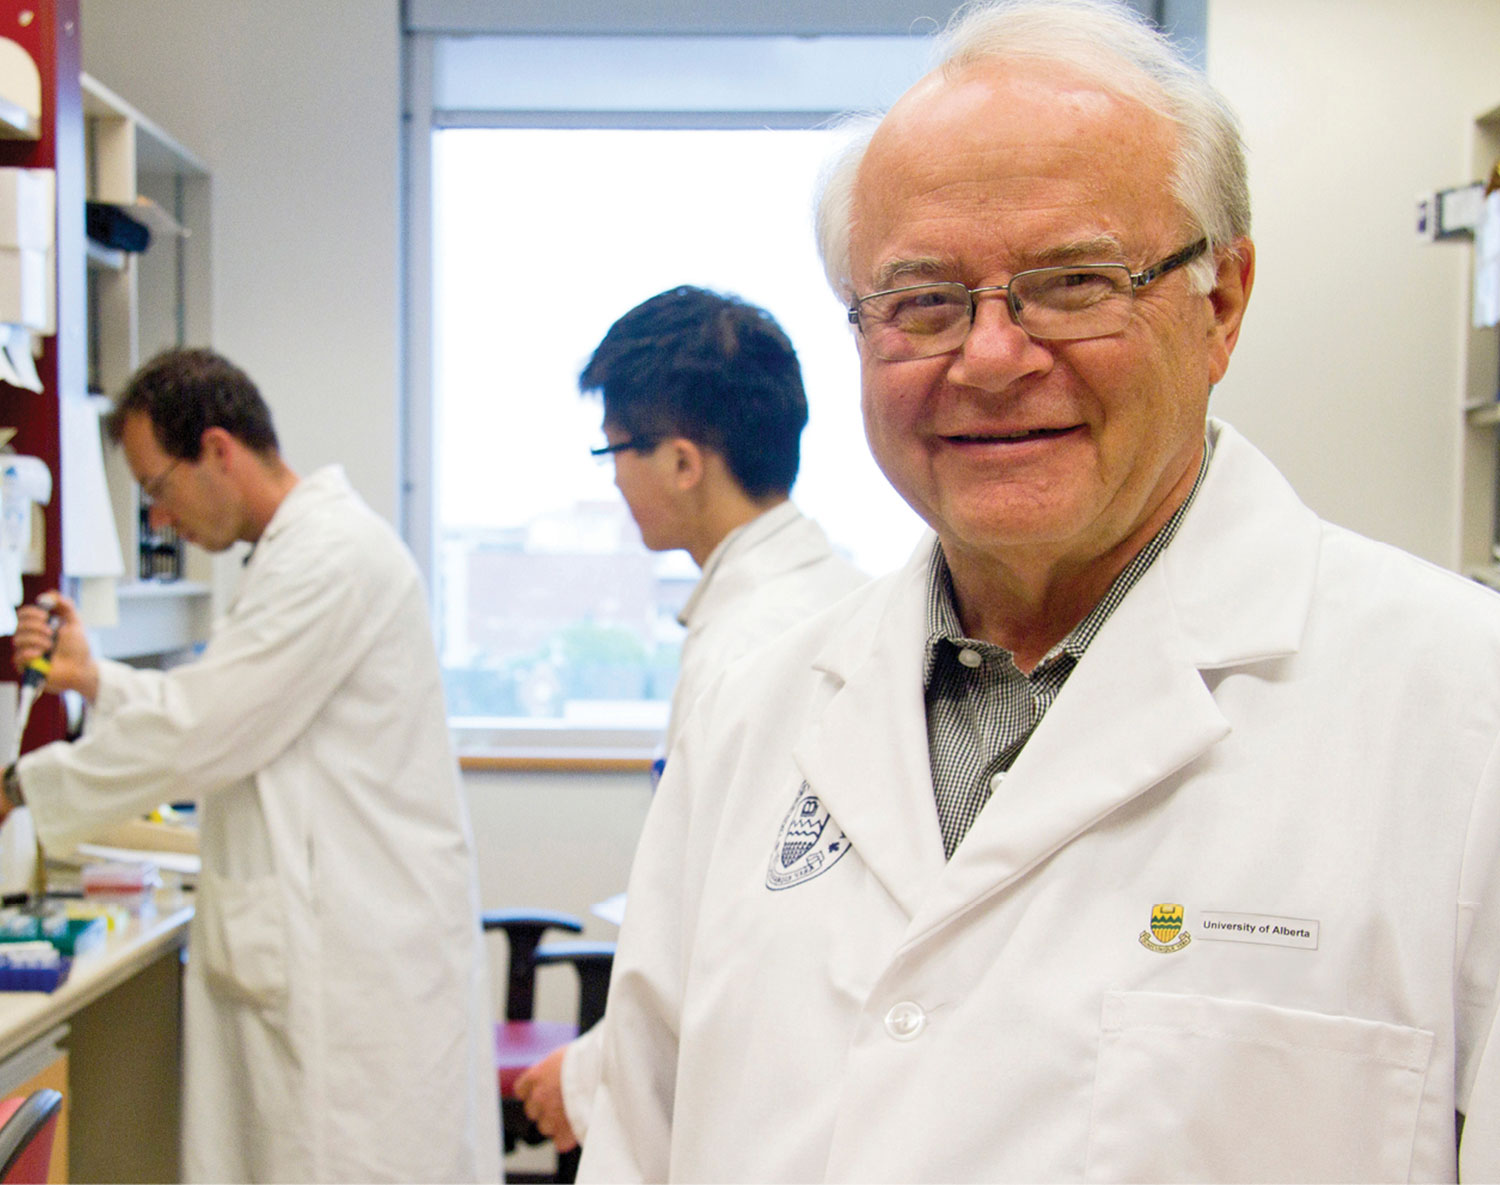 The U of A's Li Ka Shing Institute of Virology is responding to the COVID-19 crisis